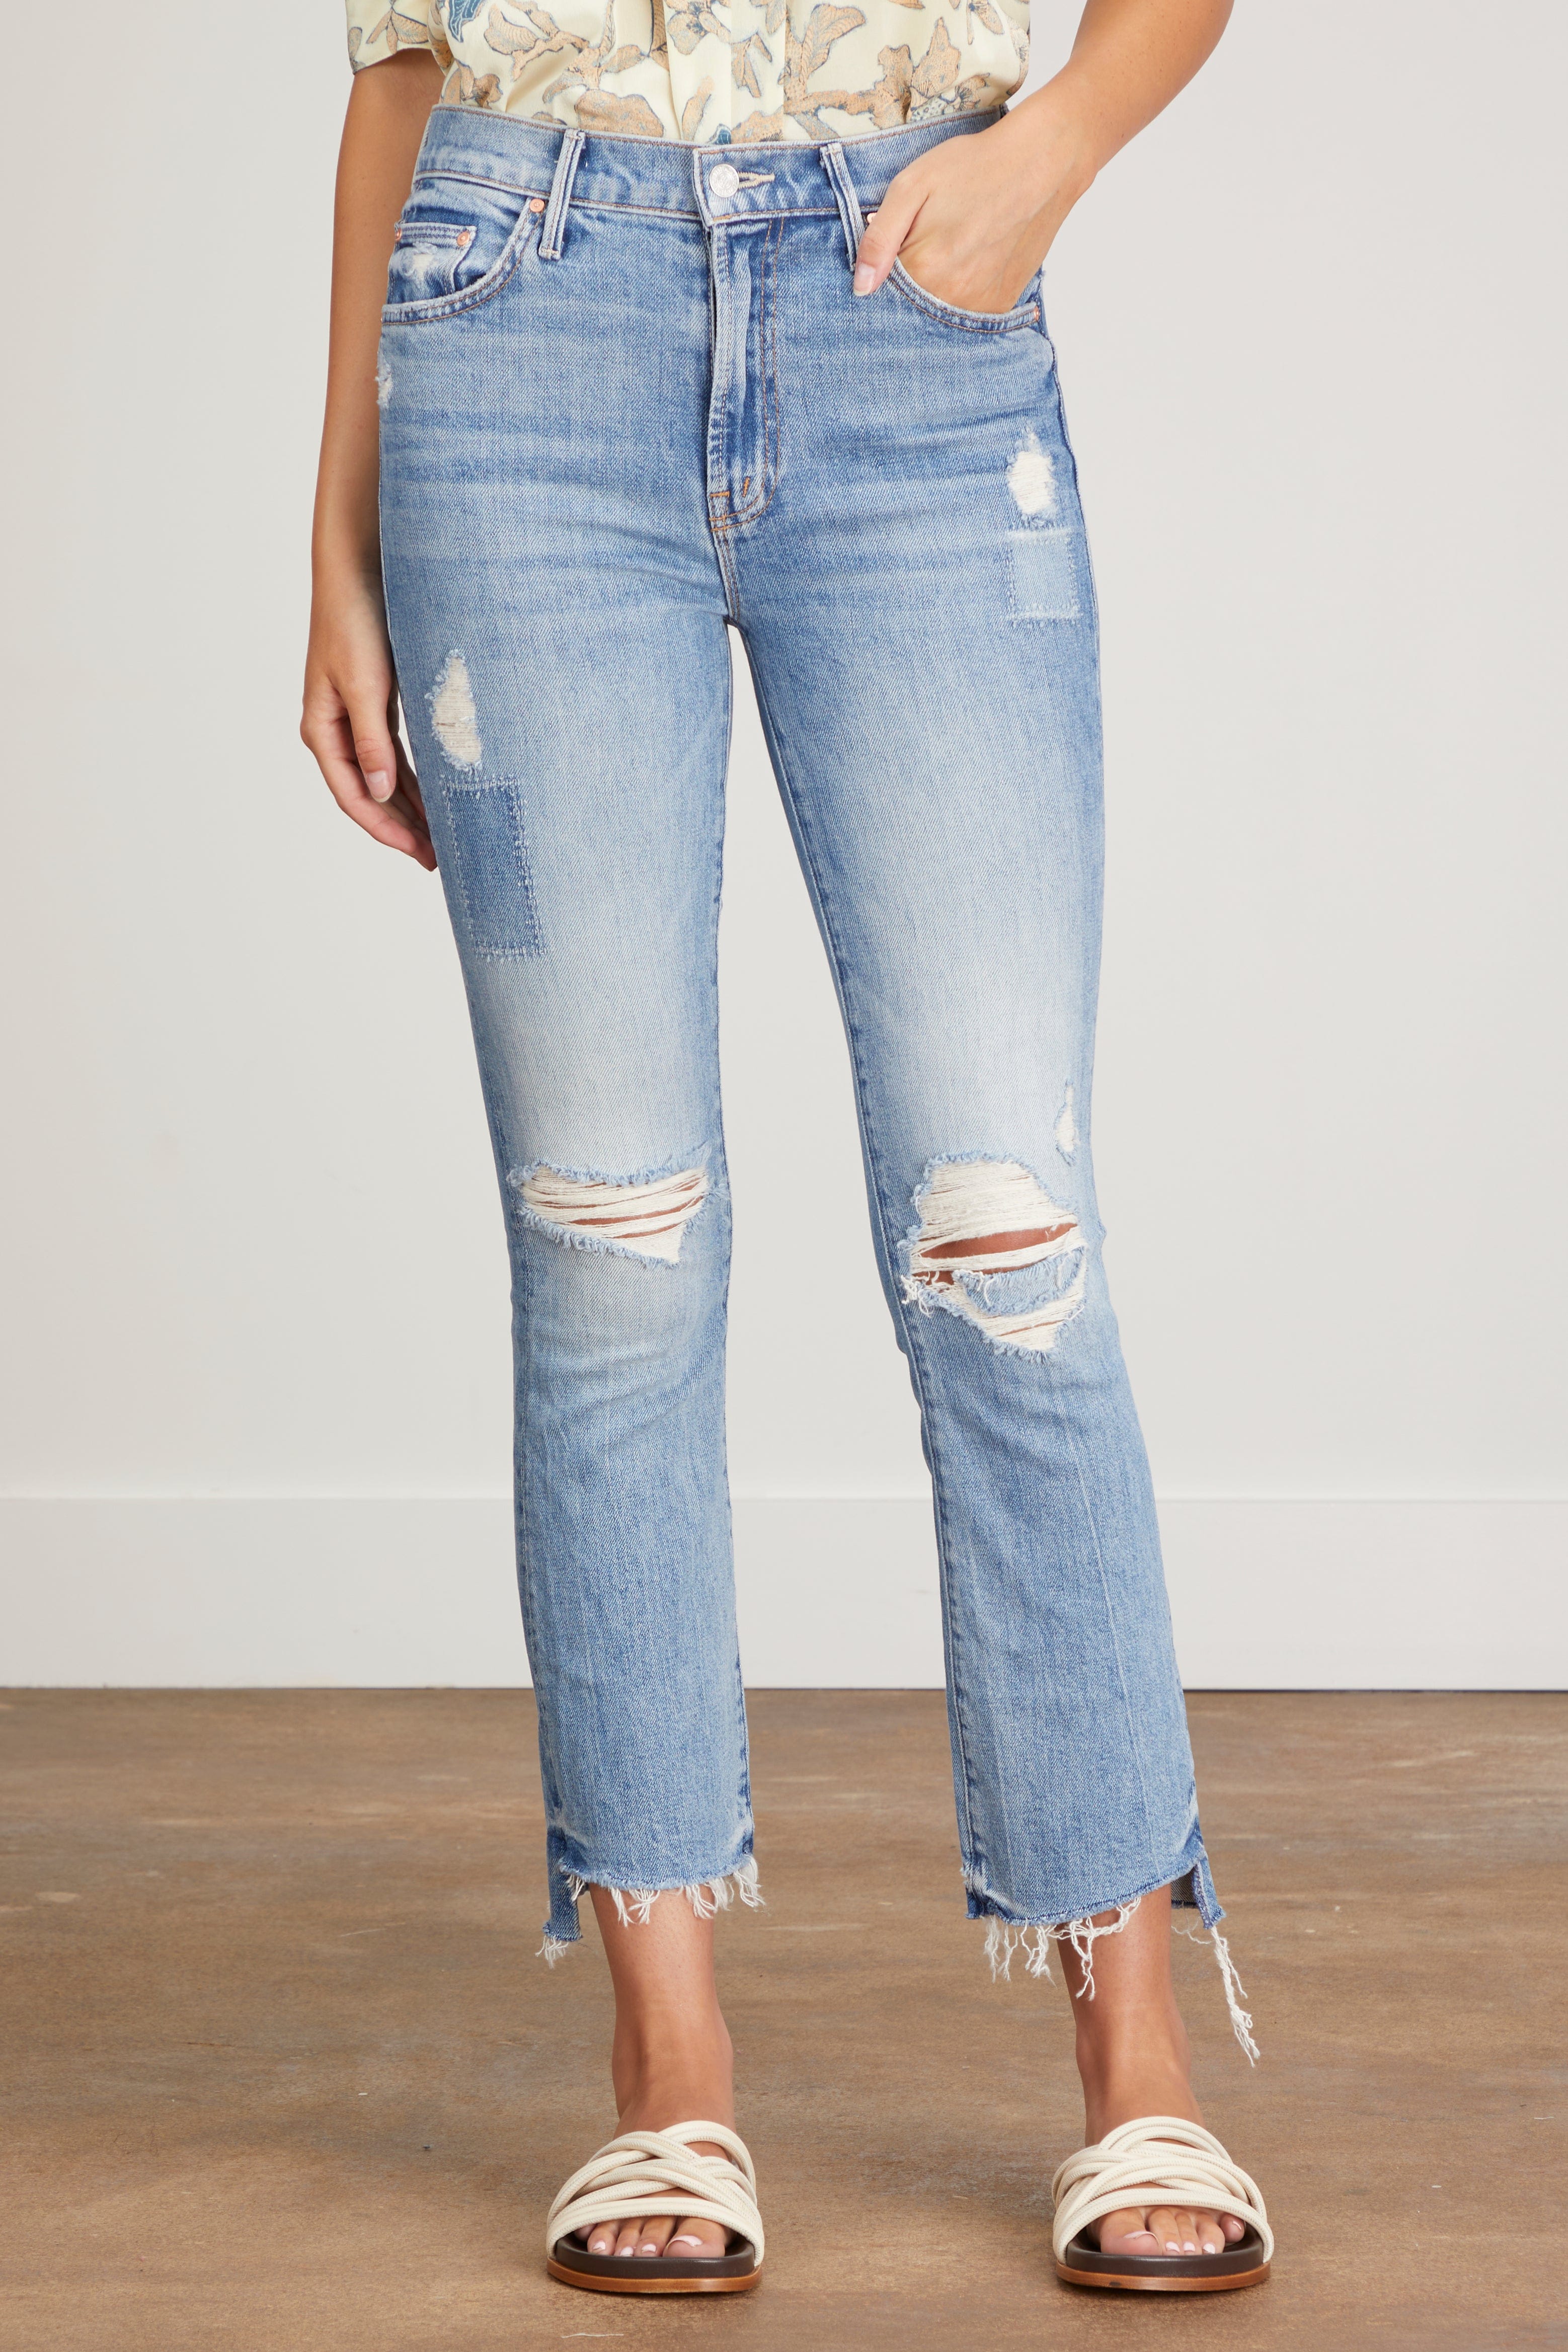 MOTHER Jeans The Insider Crop Step Fray Jean in We Are Castaways